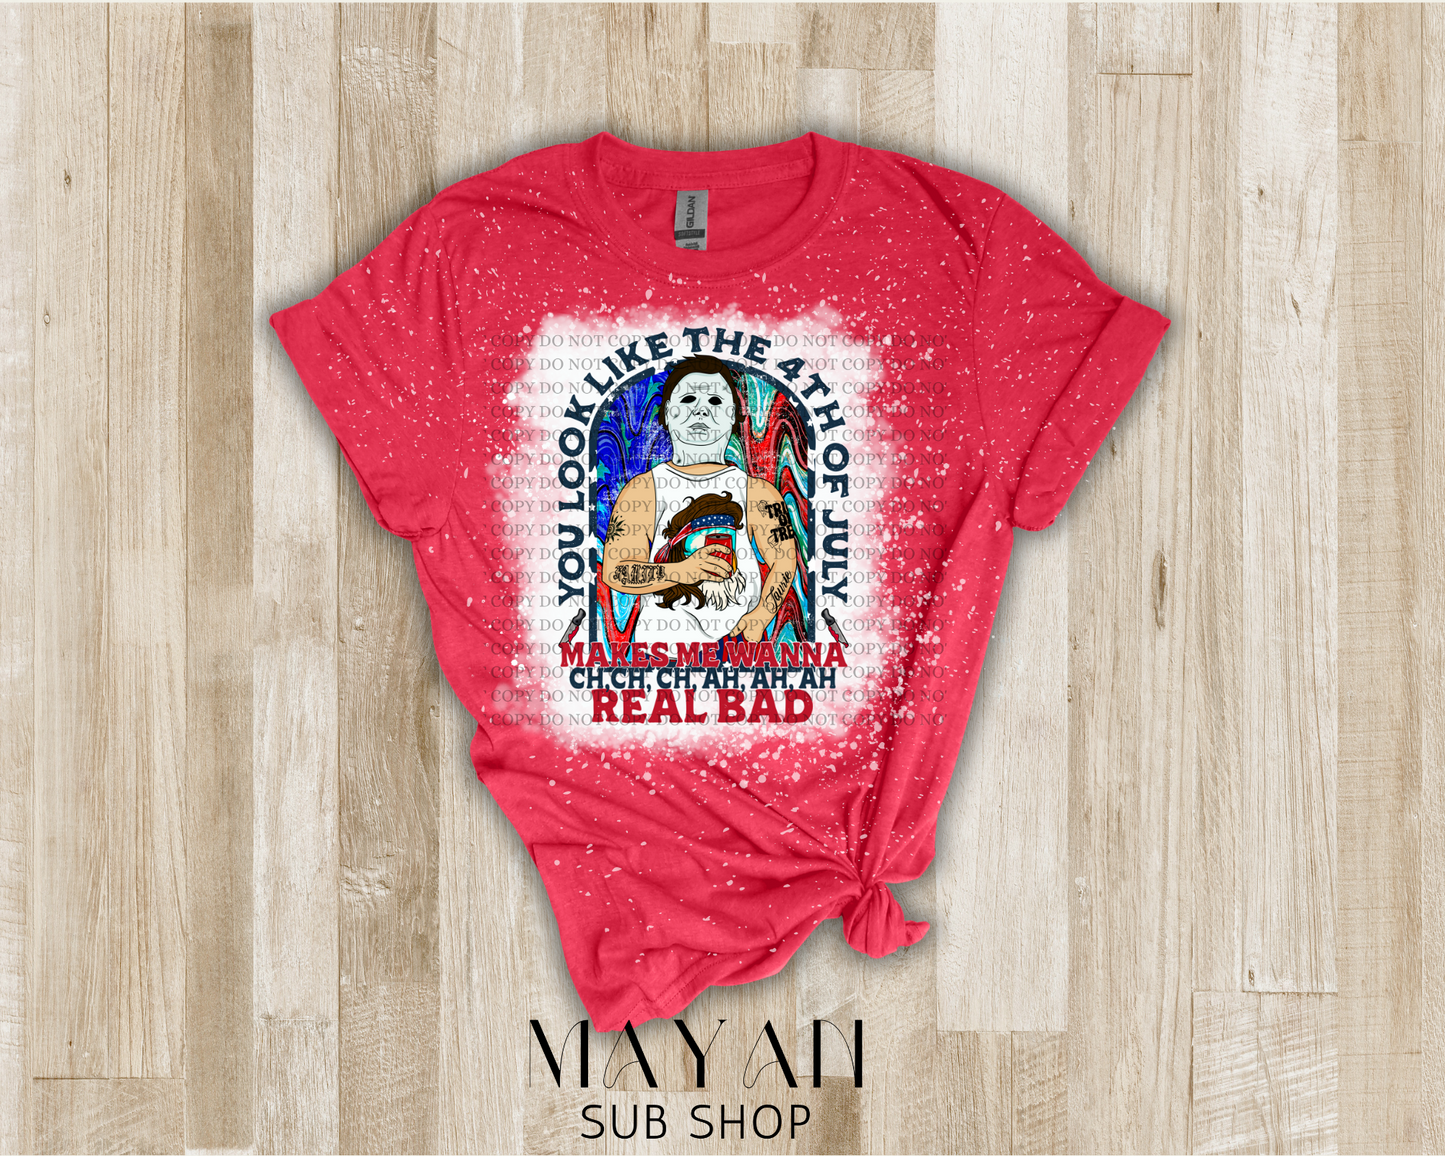 Look like the 4th of July Michael bleached shirt - Mayan Sub Shop